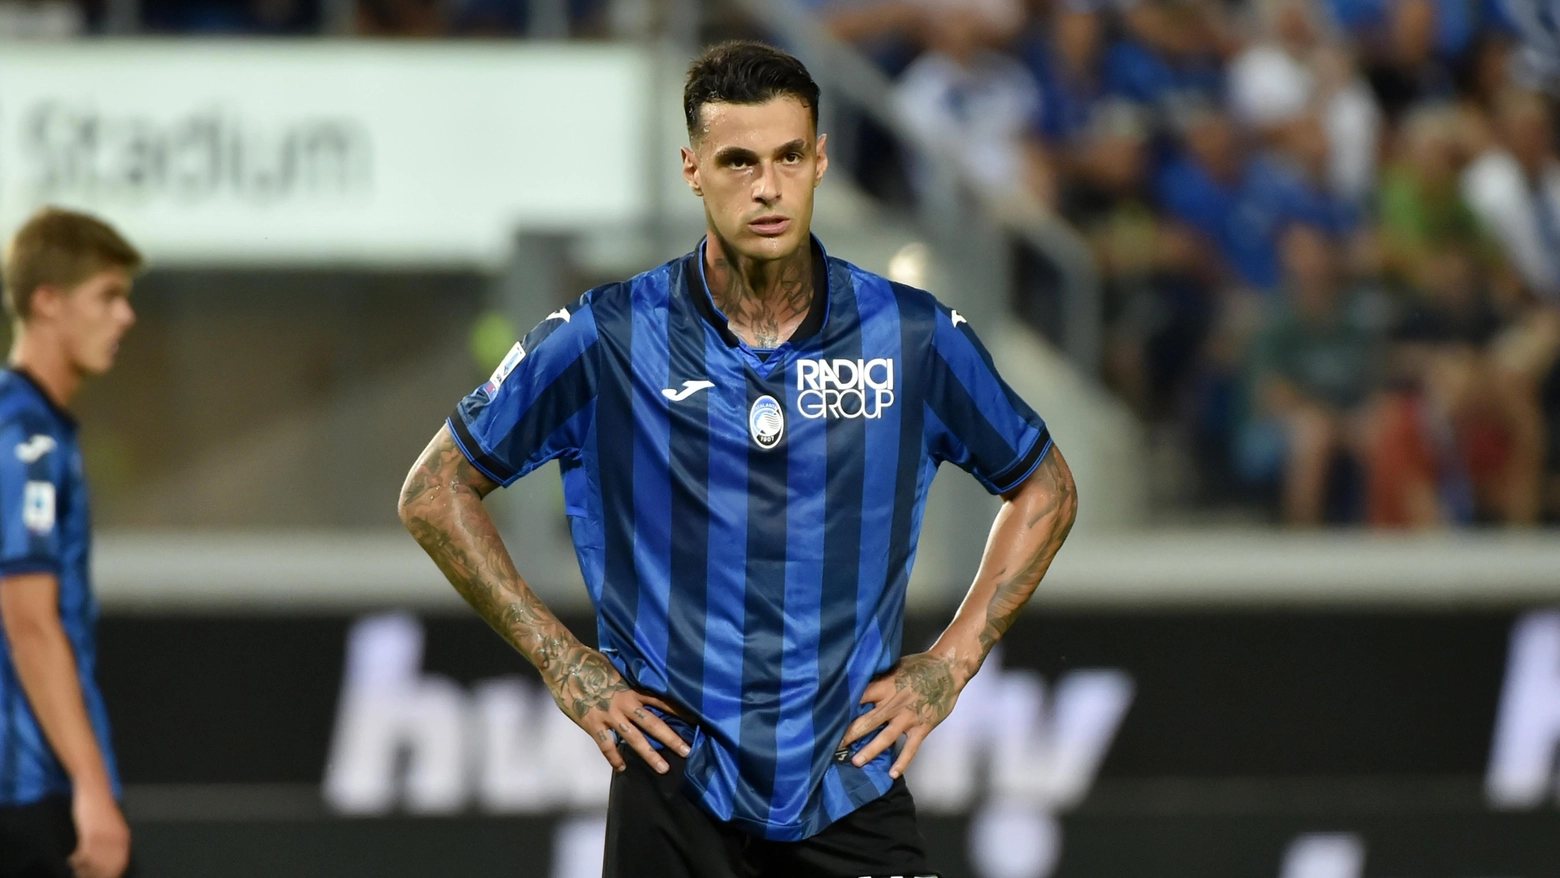 As feared, Gianluca Scamacca will have to skip a few games due to a thigh injury. The Atalanta marksman has been diagnosed with a first-degree lesion.